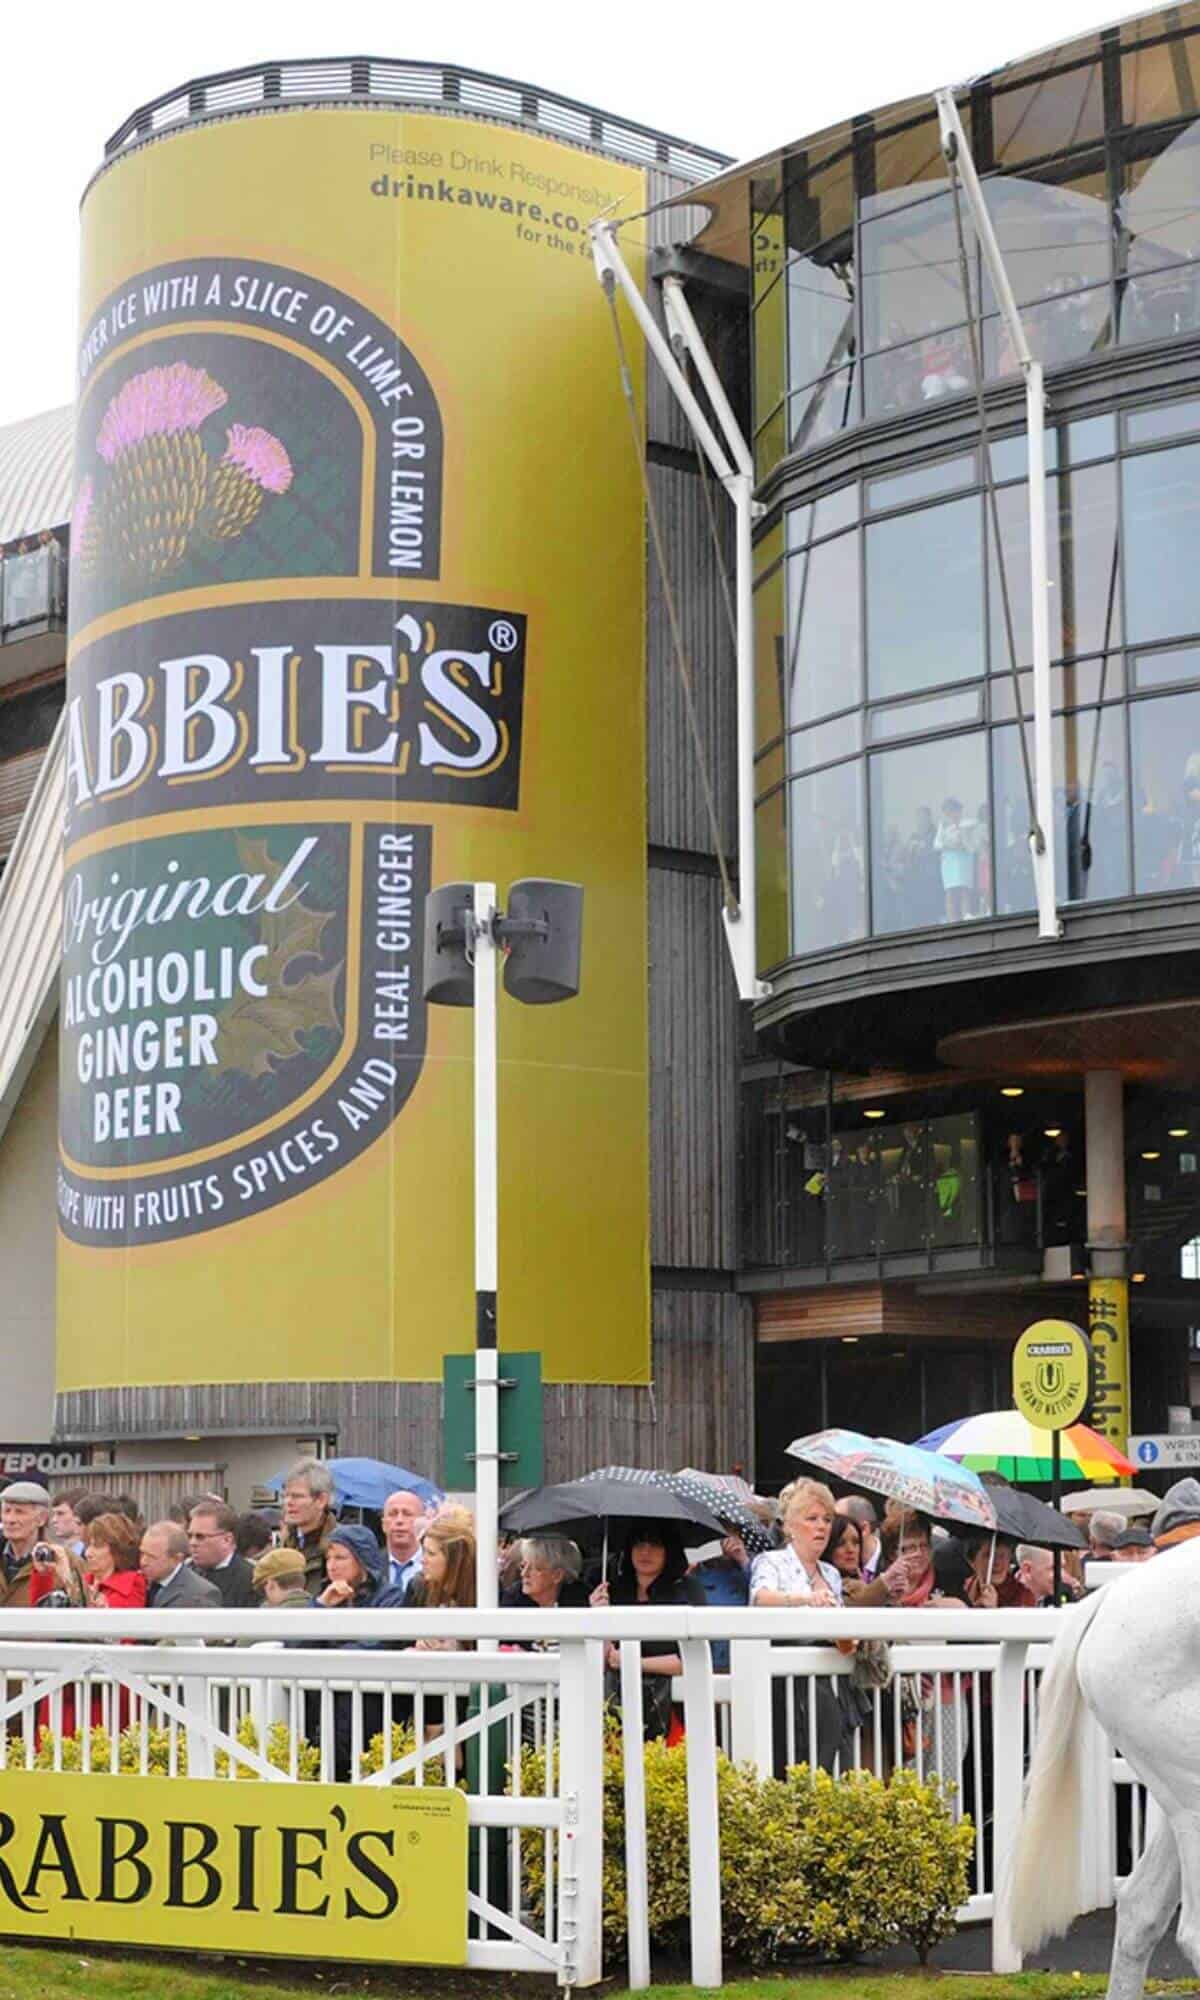 The Crabbies Ginger Beer building with a crowd of people out front.